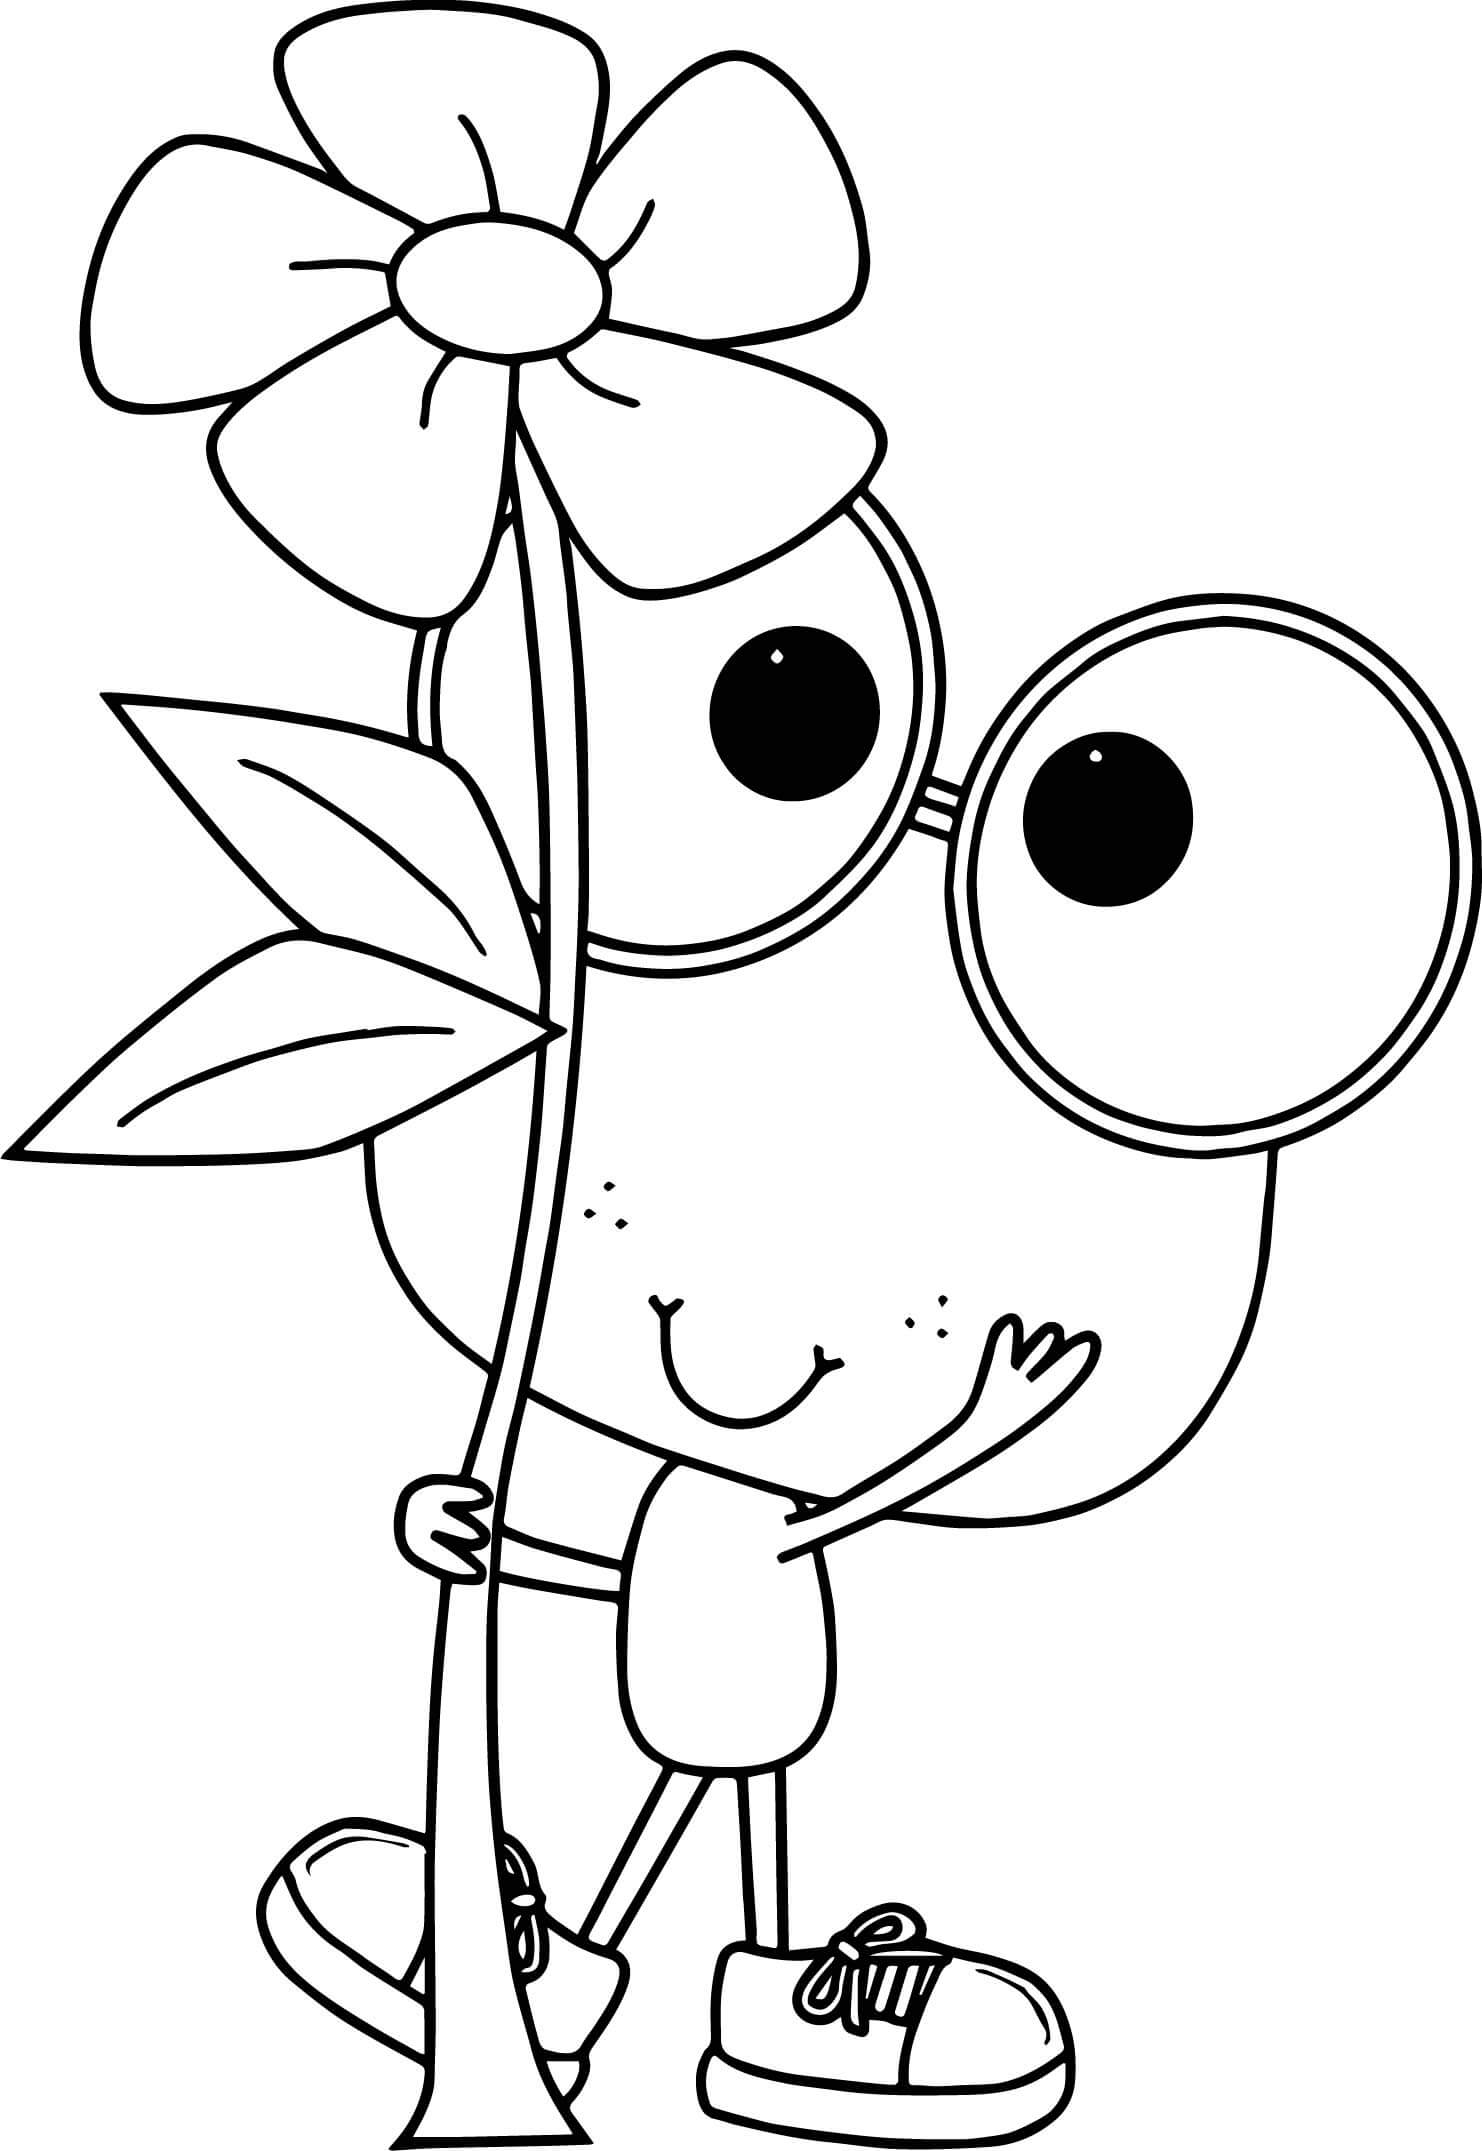 Cute Little Frog Coloring Page